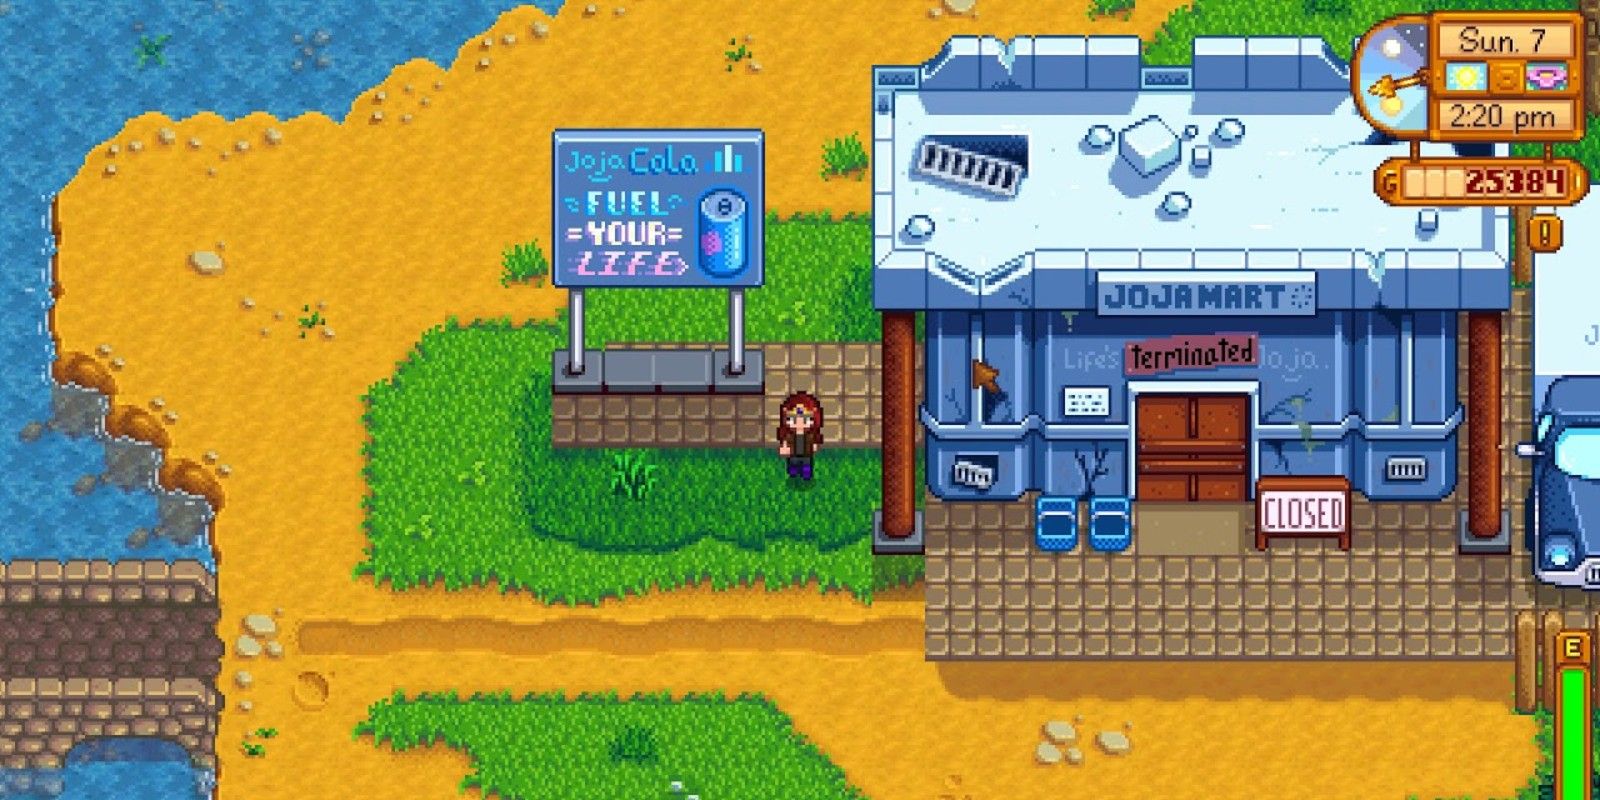 A player finds the truck near JojaMart by following Secret Note 20 in Stardew Valley